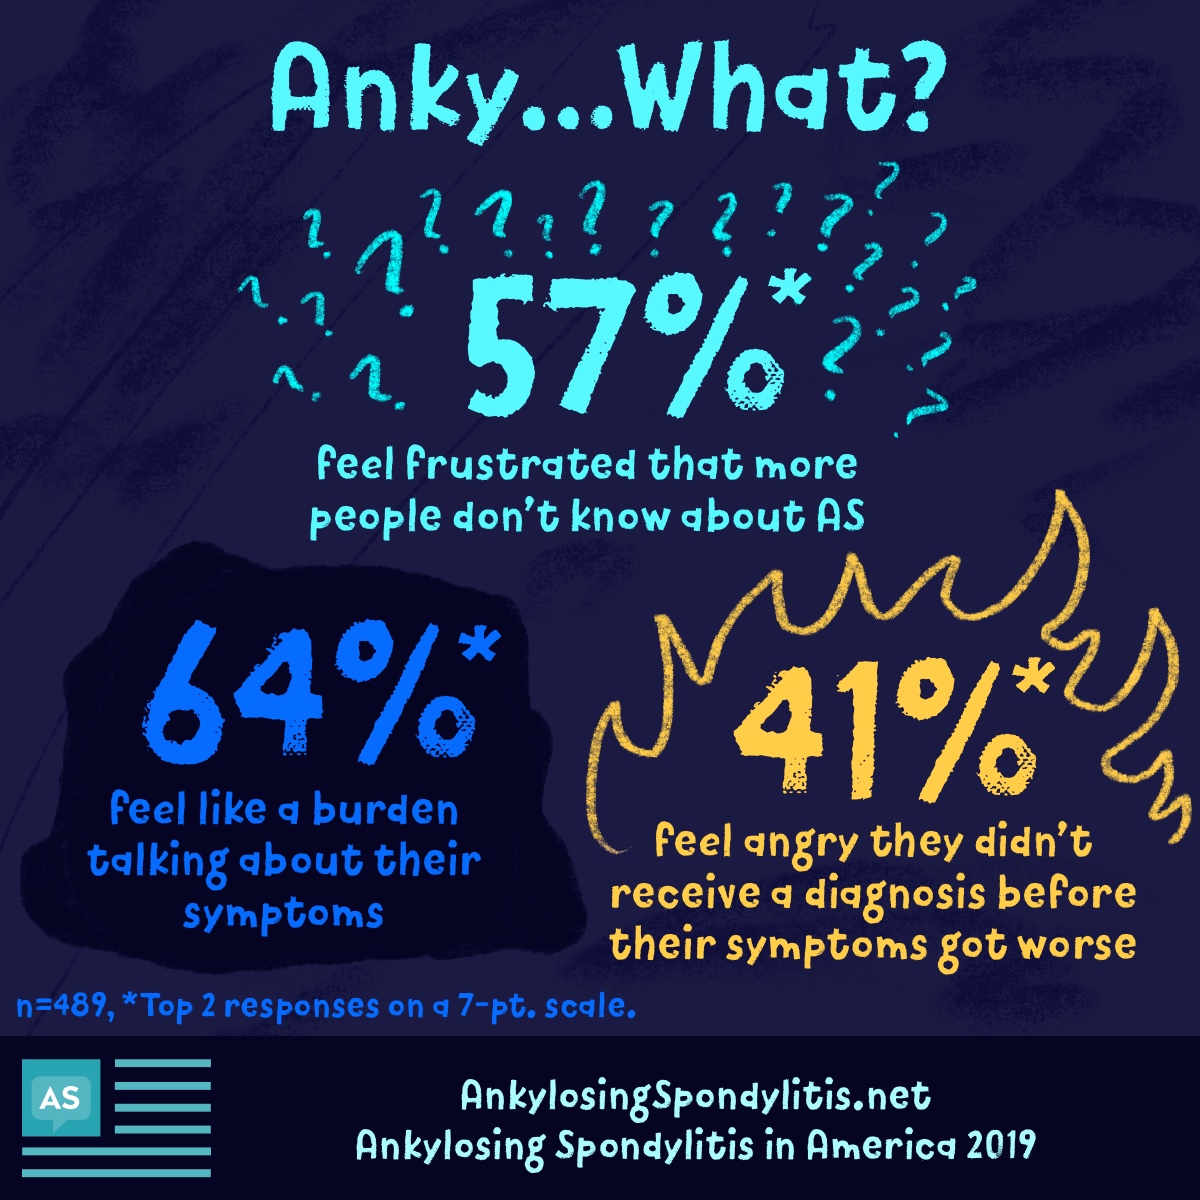 57% feel frustrated that more people don’t know about AS, 64% feel like a burden when talking about their symptoms, 41% feel angry they didn’t receive a diagnosis before symptoms got worse.